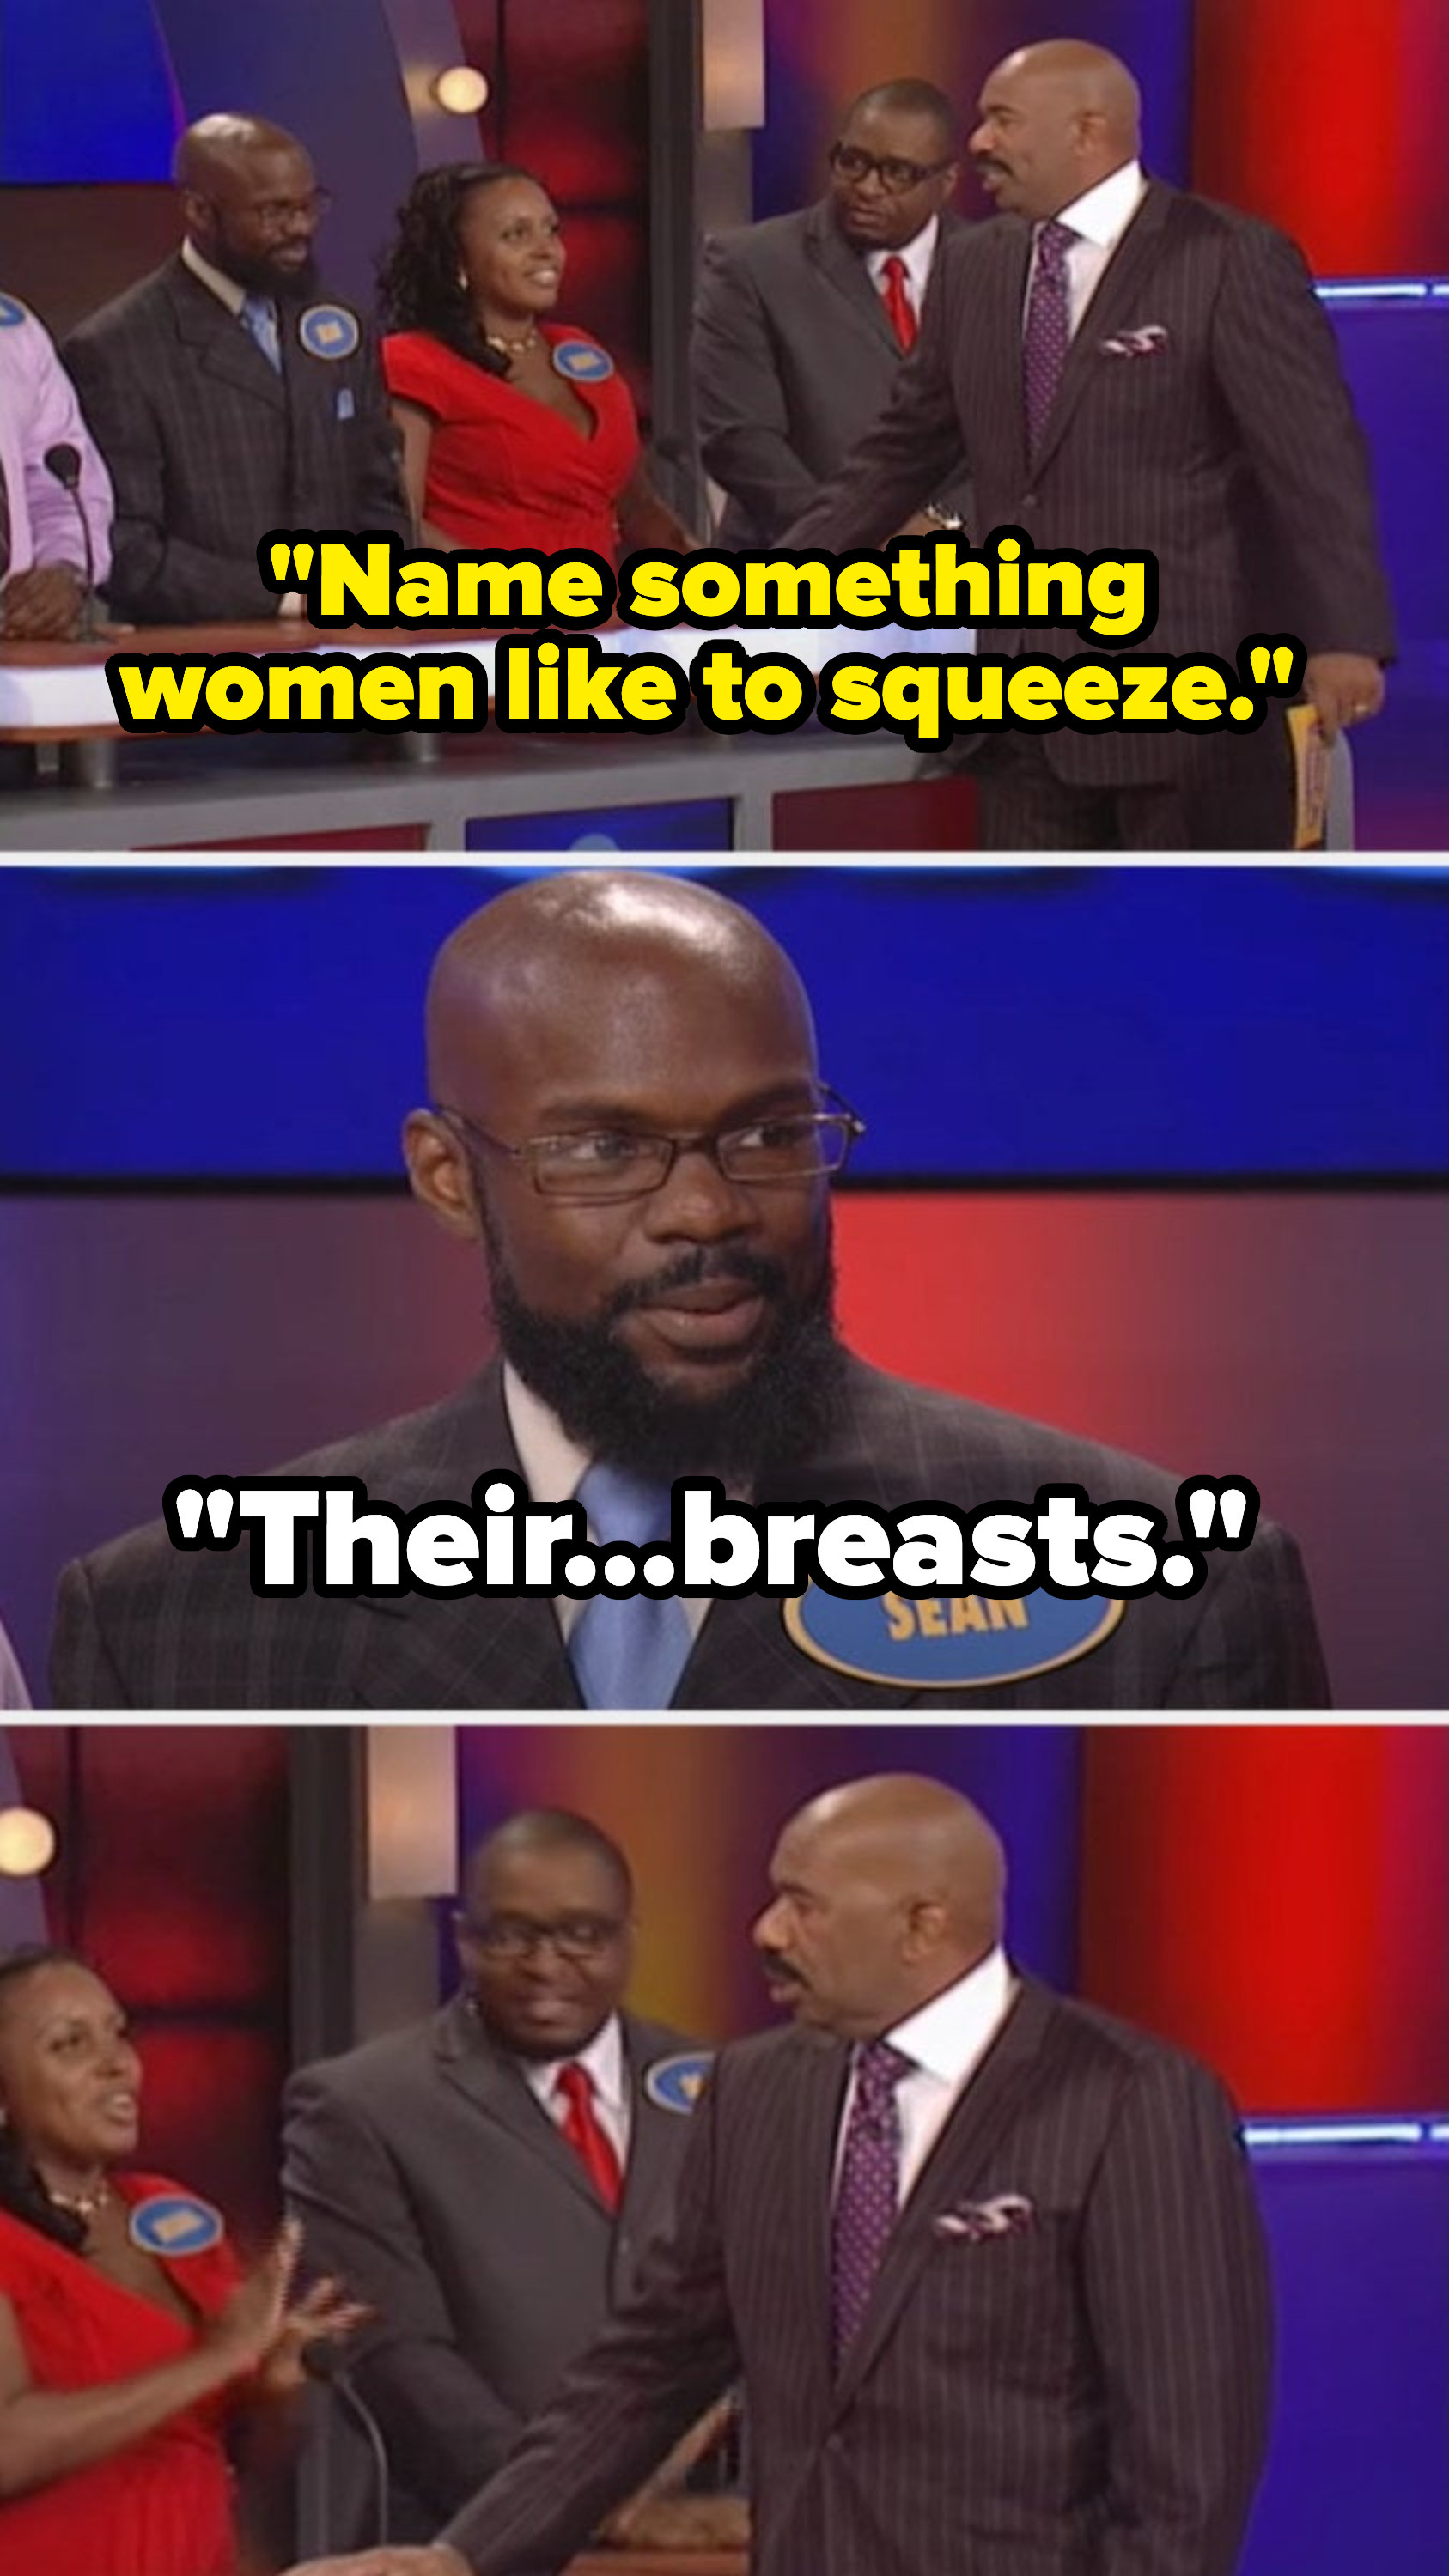 Steve says, &quot;Name something women like to squeeze,&quot; and a contestant answers, &quot;Their breasts,&quot; making Steve stare in disbelief